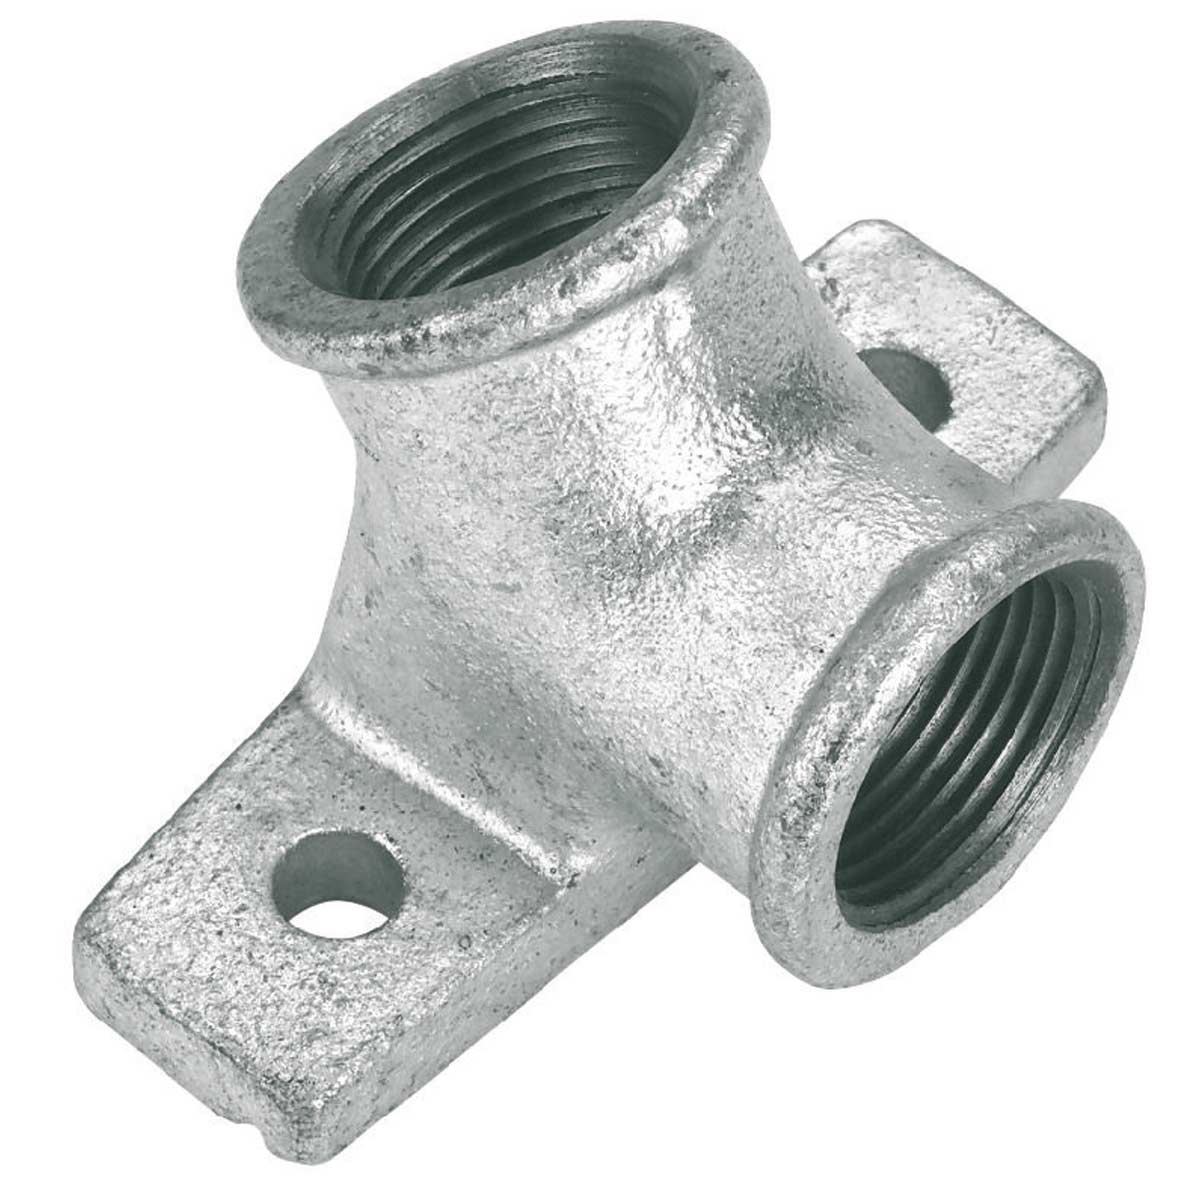 Wall bracket malleablecasting